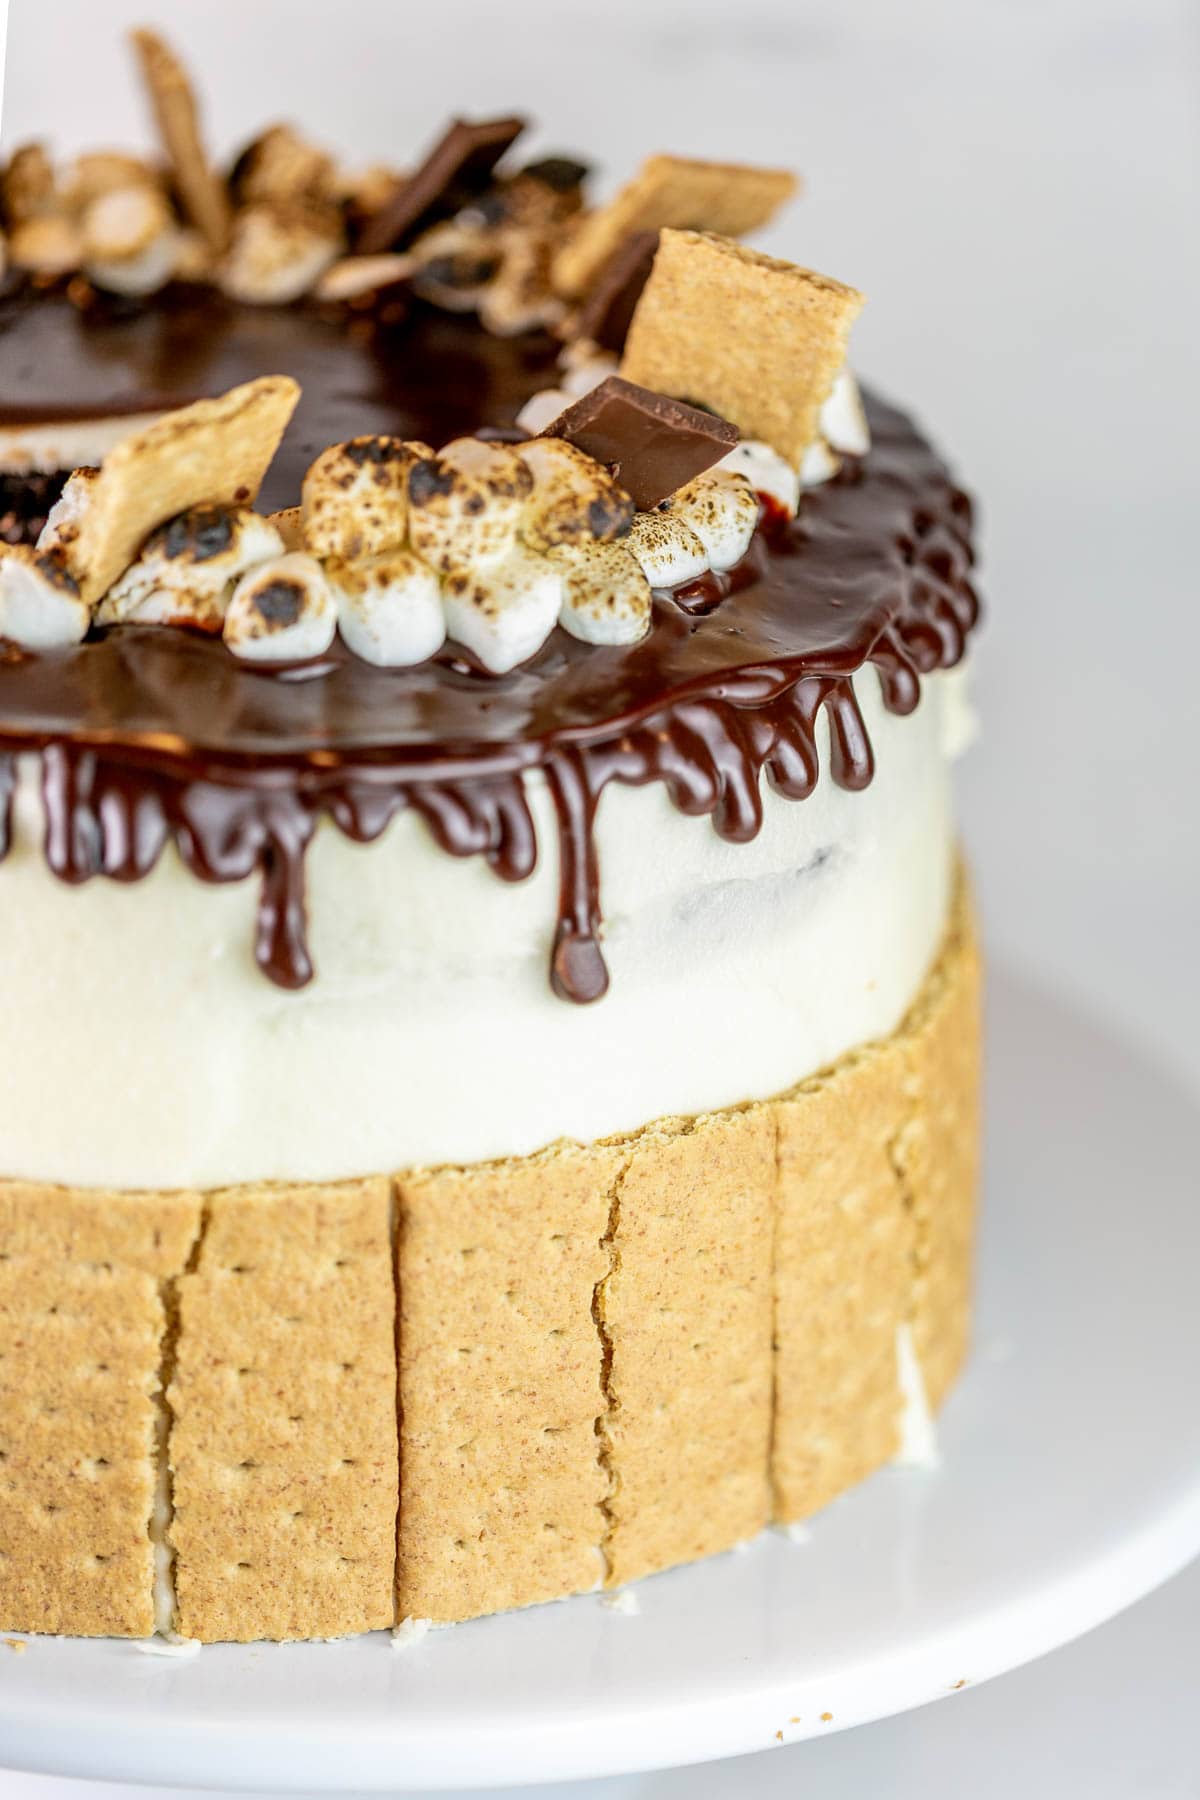 decorated s'mores cake with a ring of toasted marshmallows on top